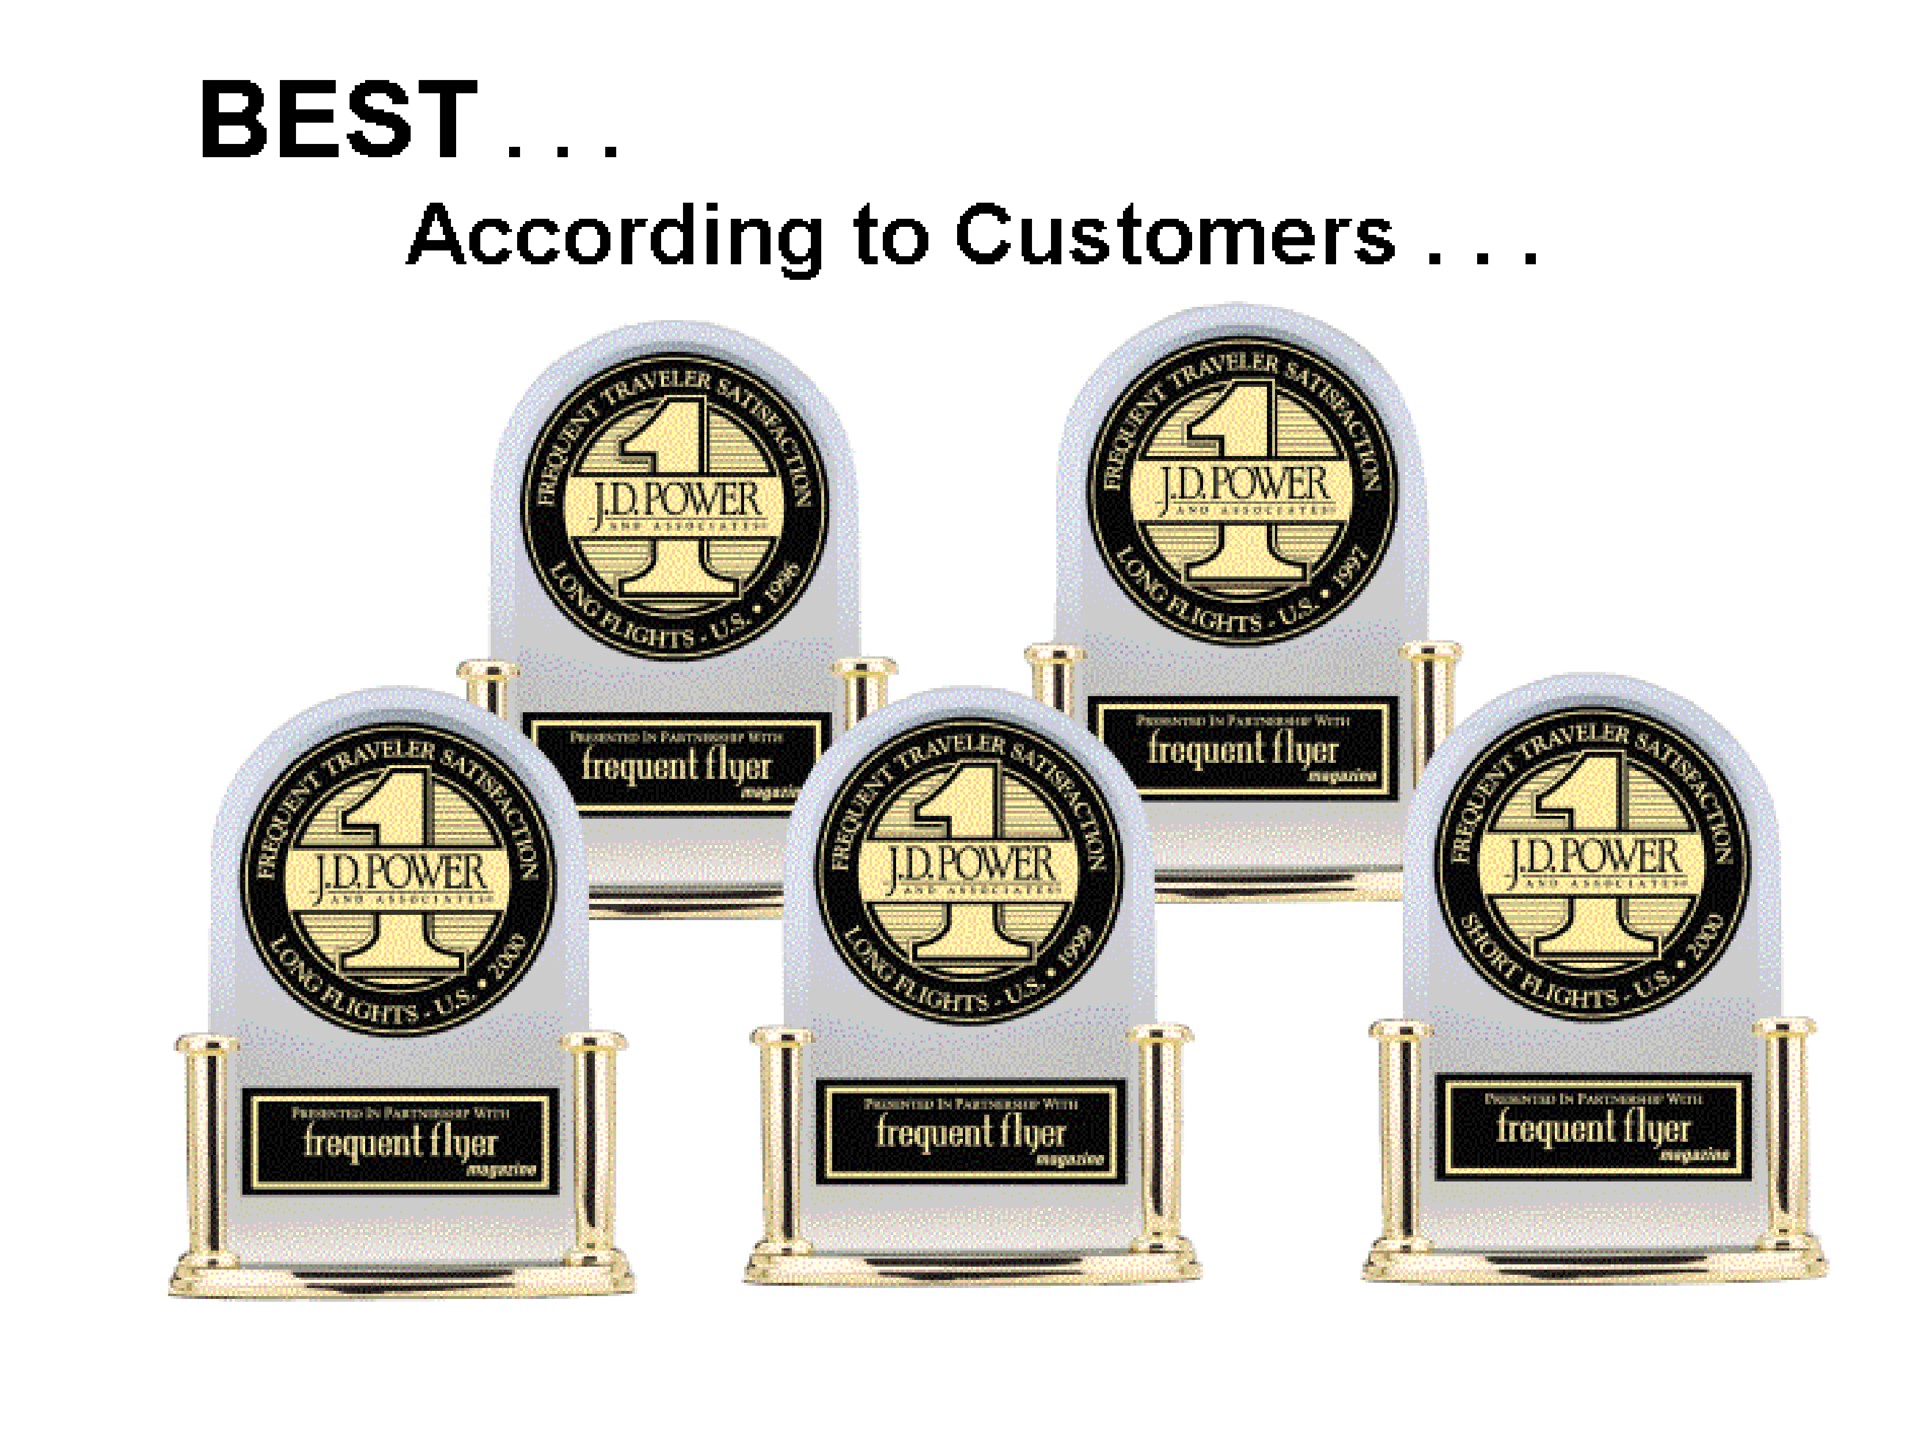 best according to customers | Continental Airlines